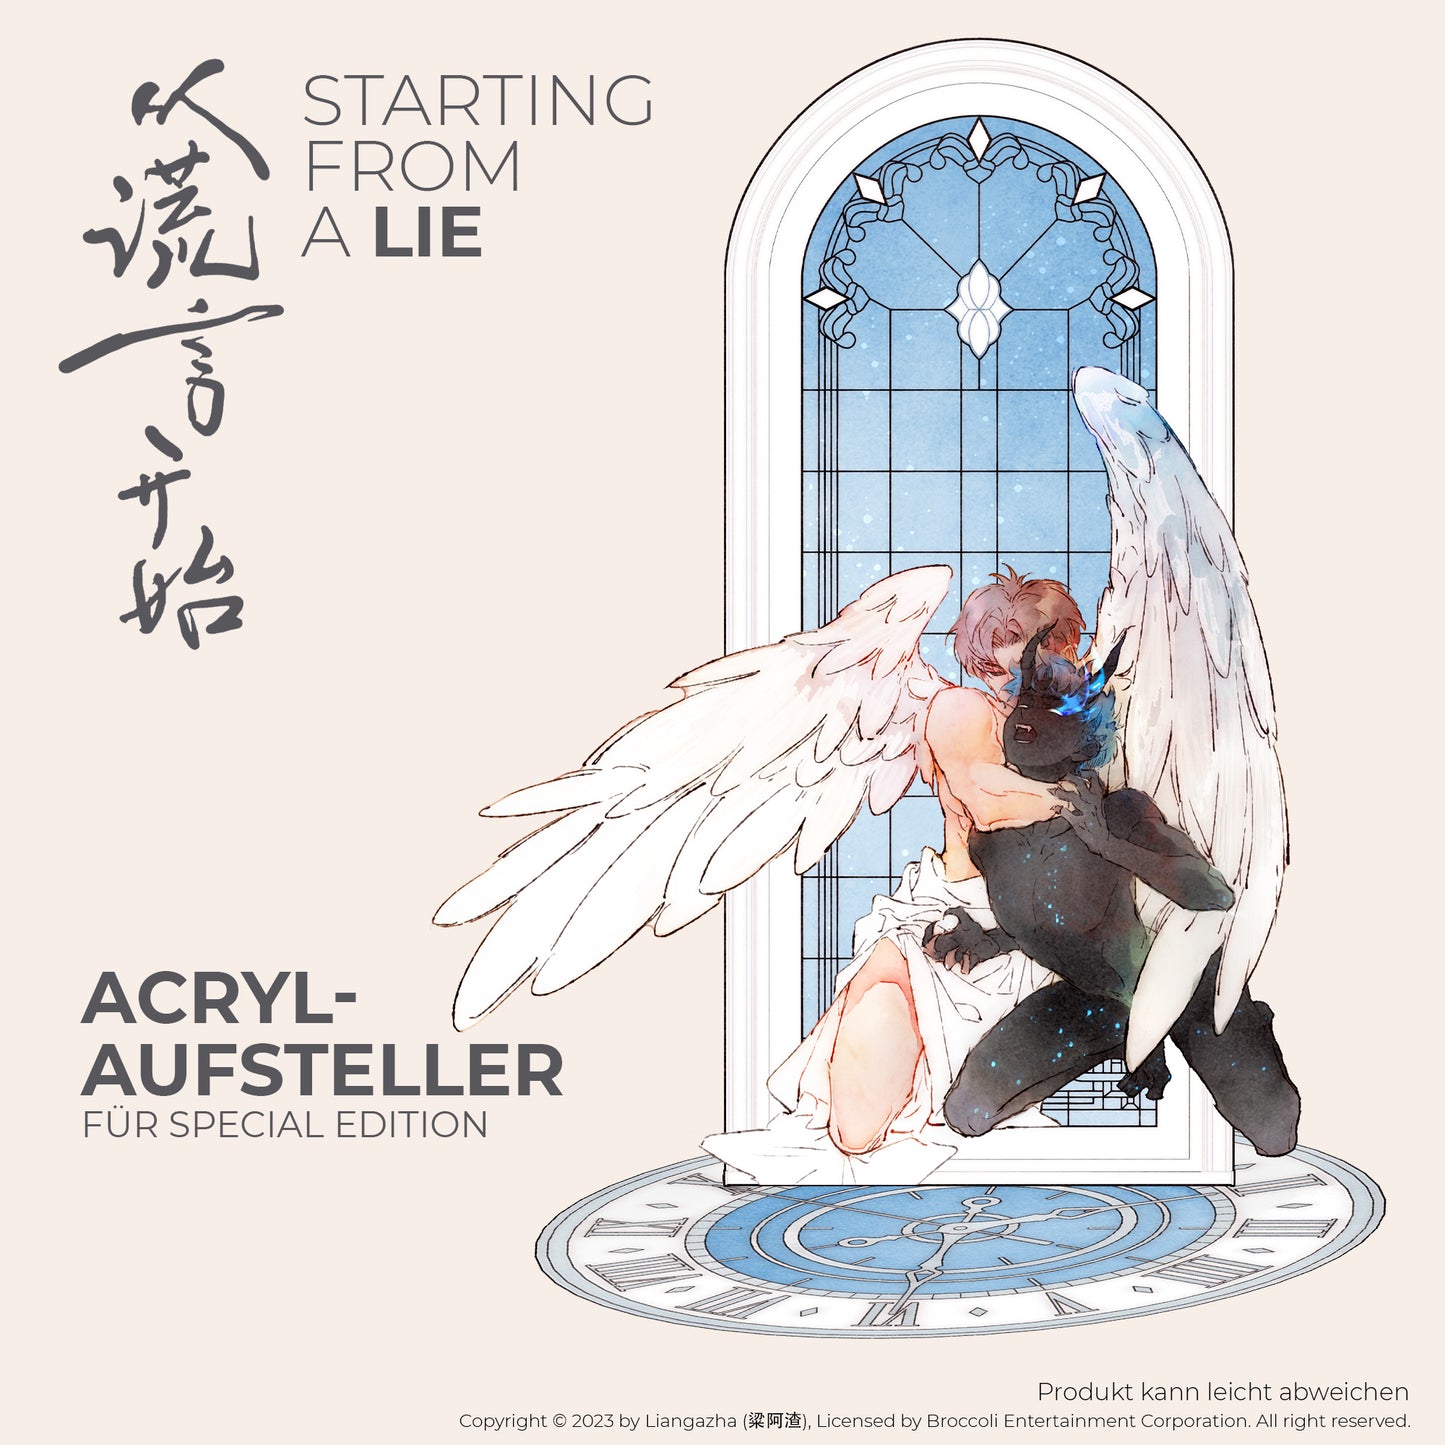 j-store-online-starting-from-a-lie-02-special-edition-2-acryl-aufsteller